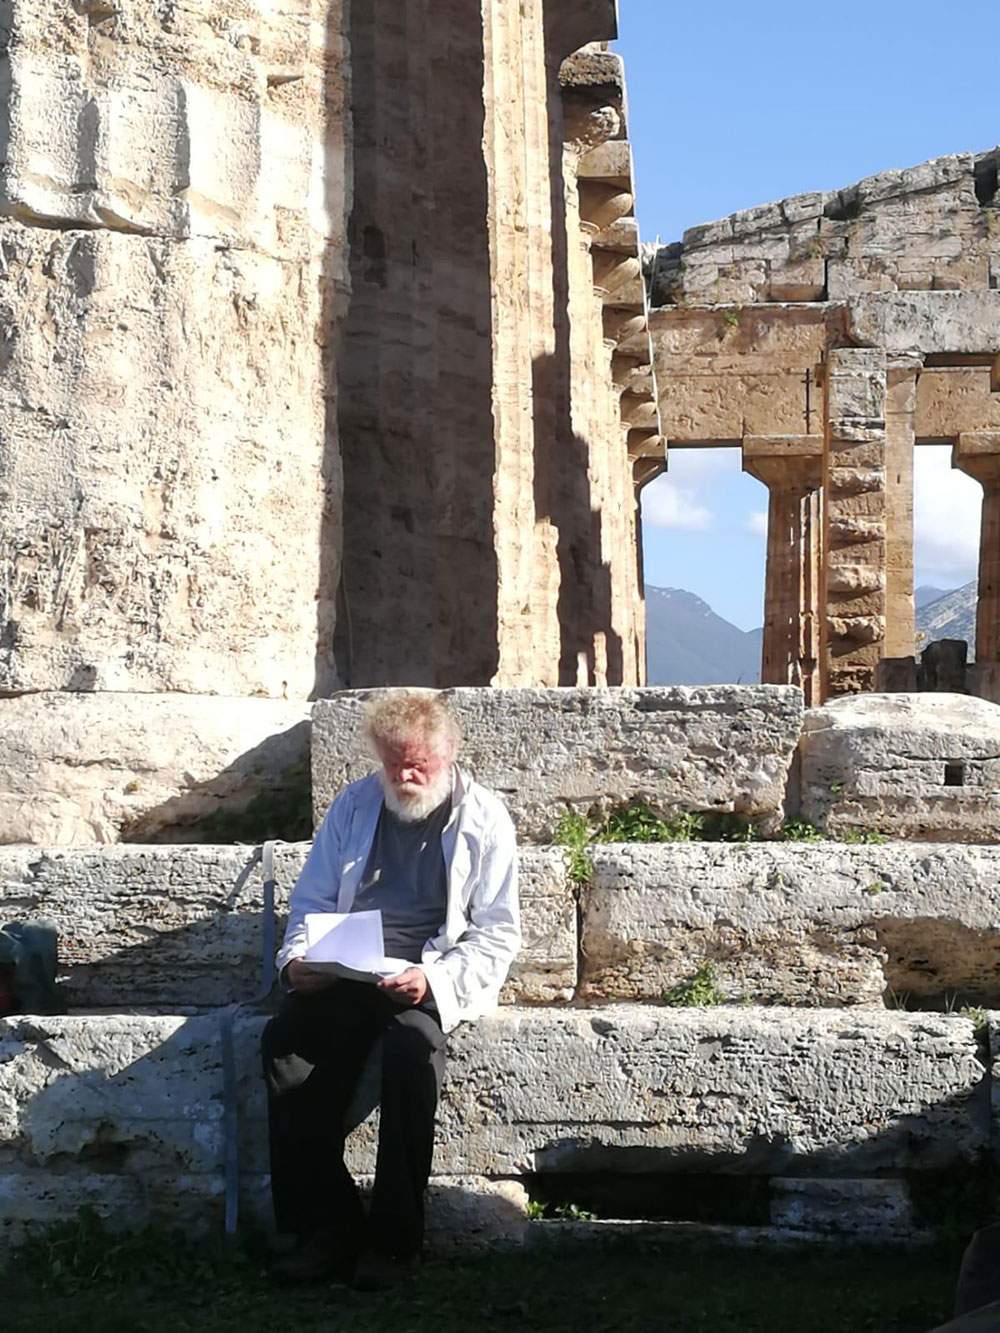 Paestum becomes a film set with Nick Nolte, Charlotte Rampling and Alba Rohrwacher